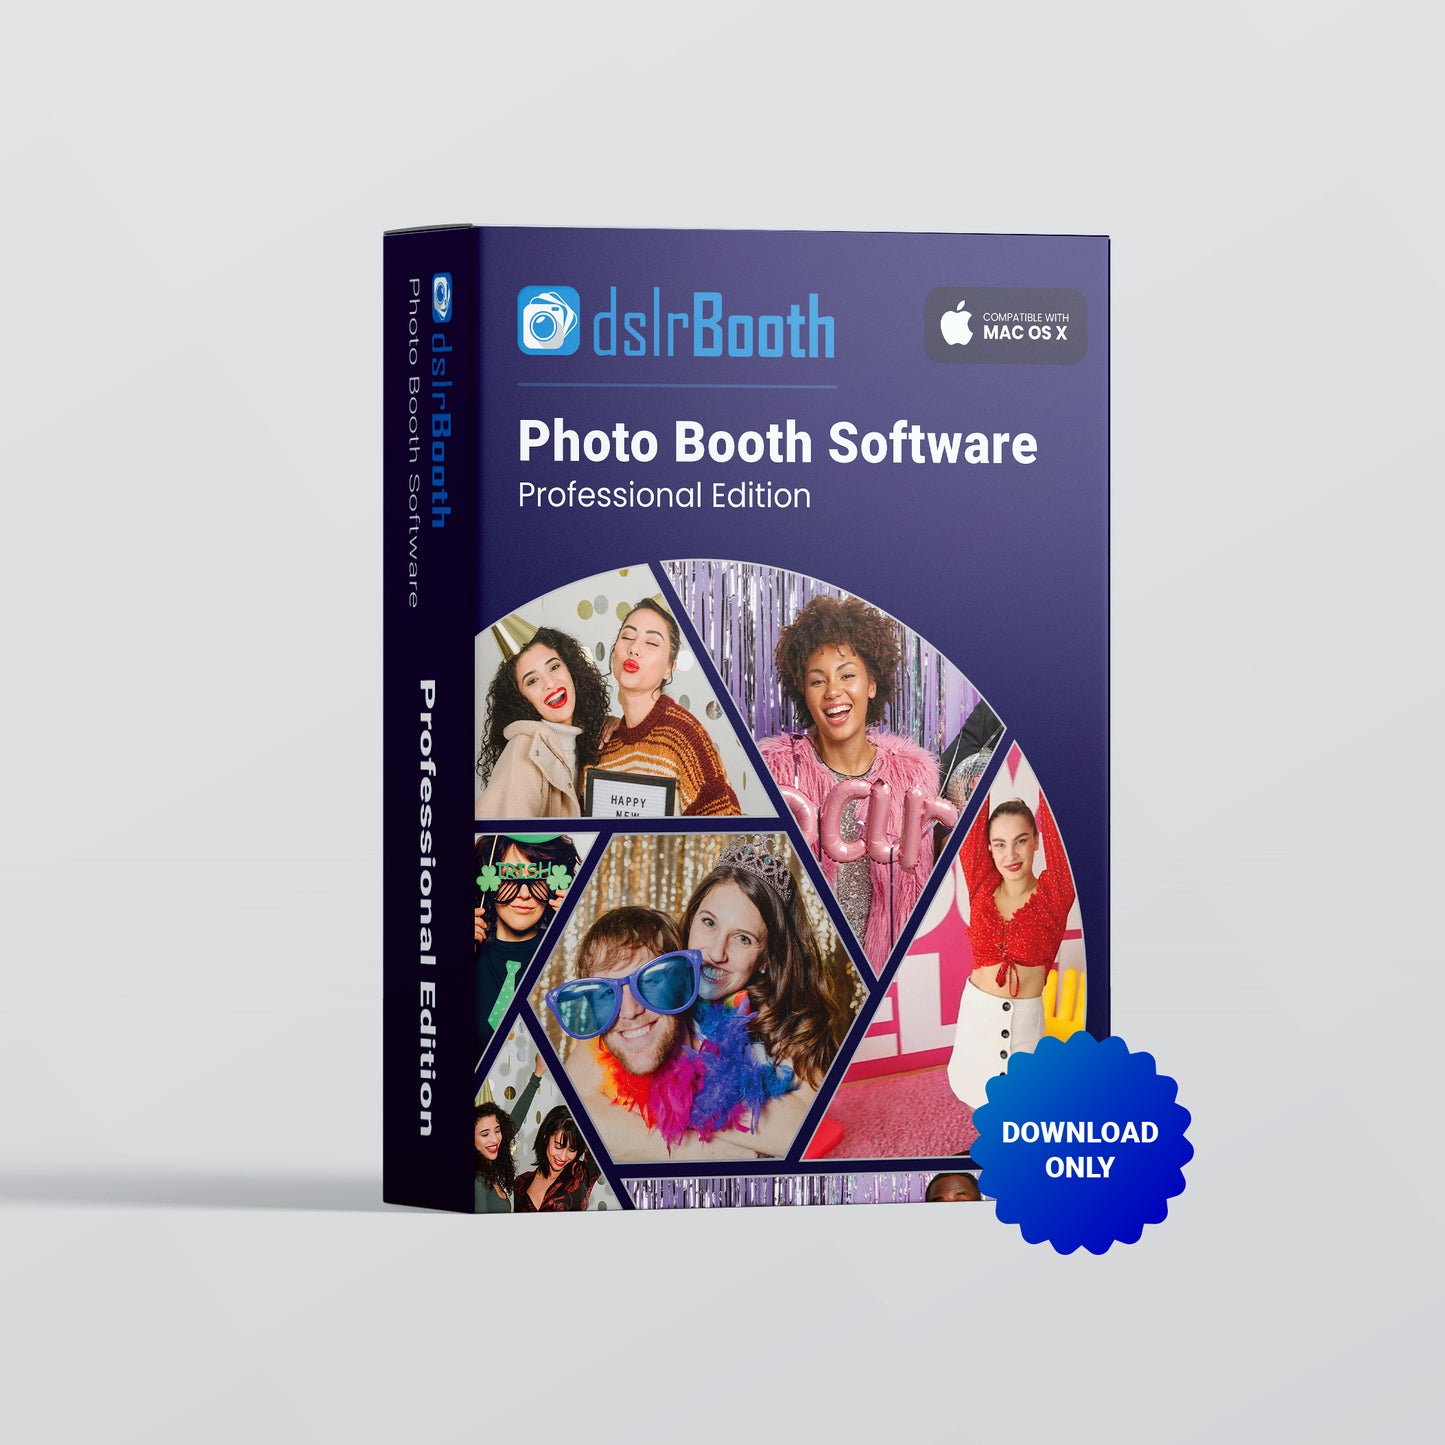 dslrBooth Photo Booth Software for Mac - Professional Edition